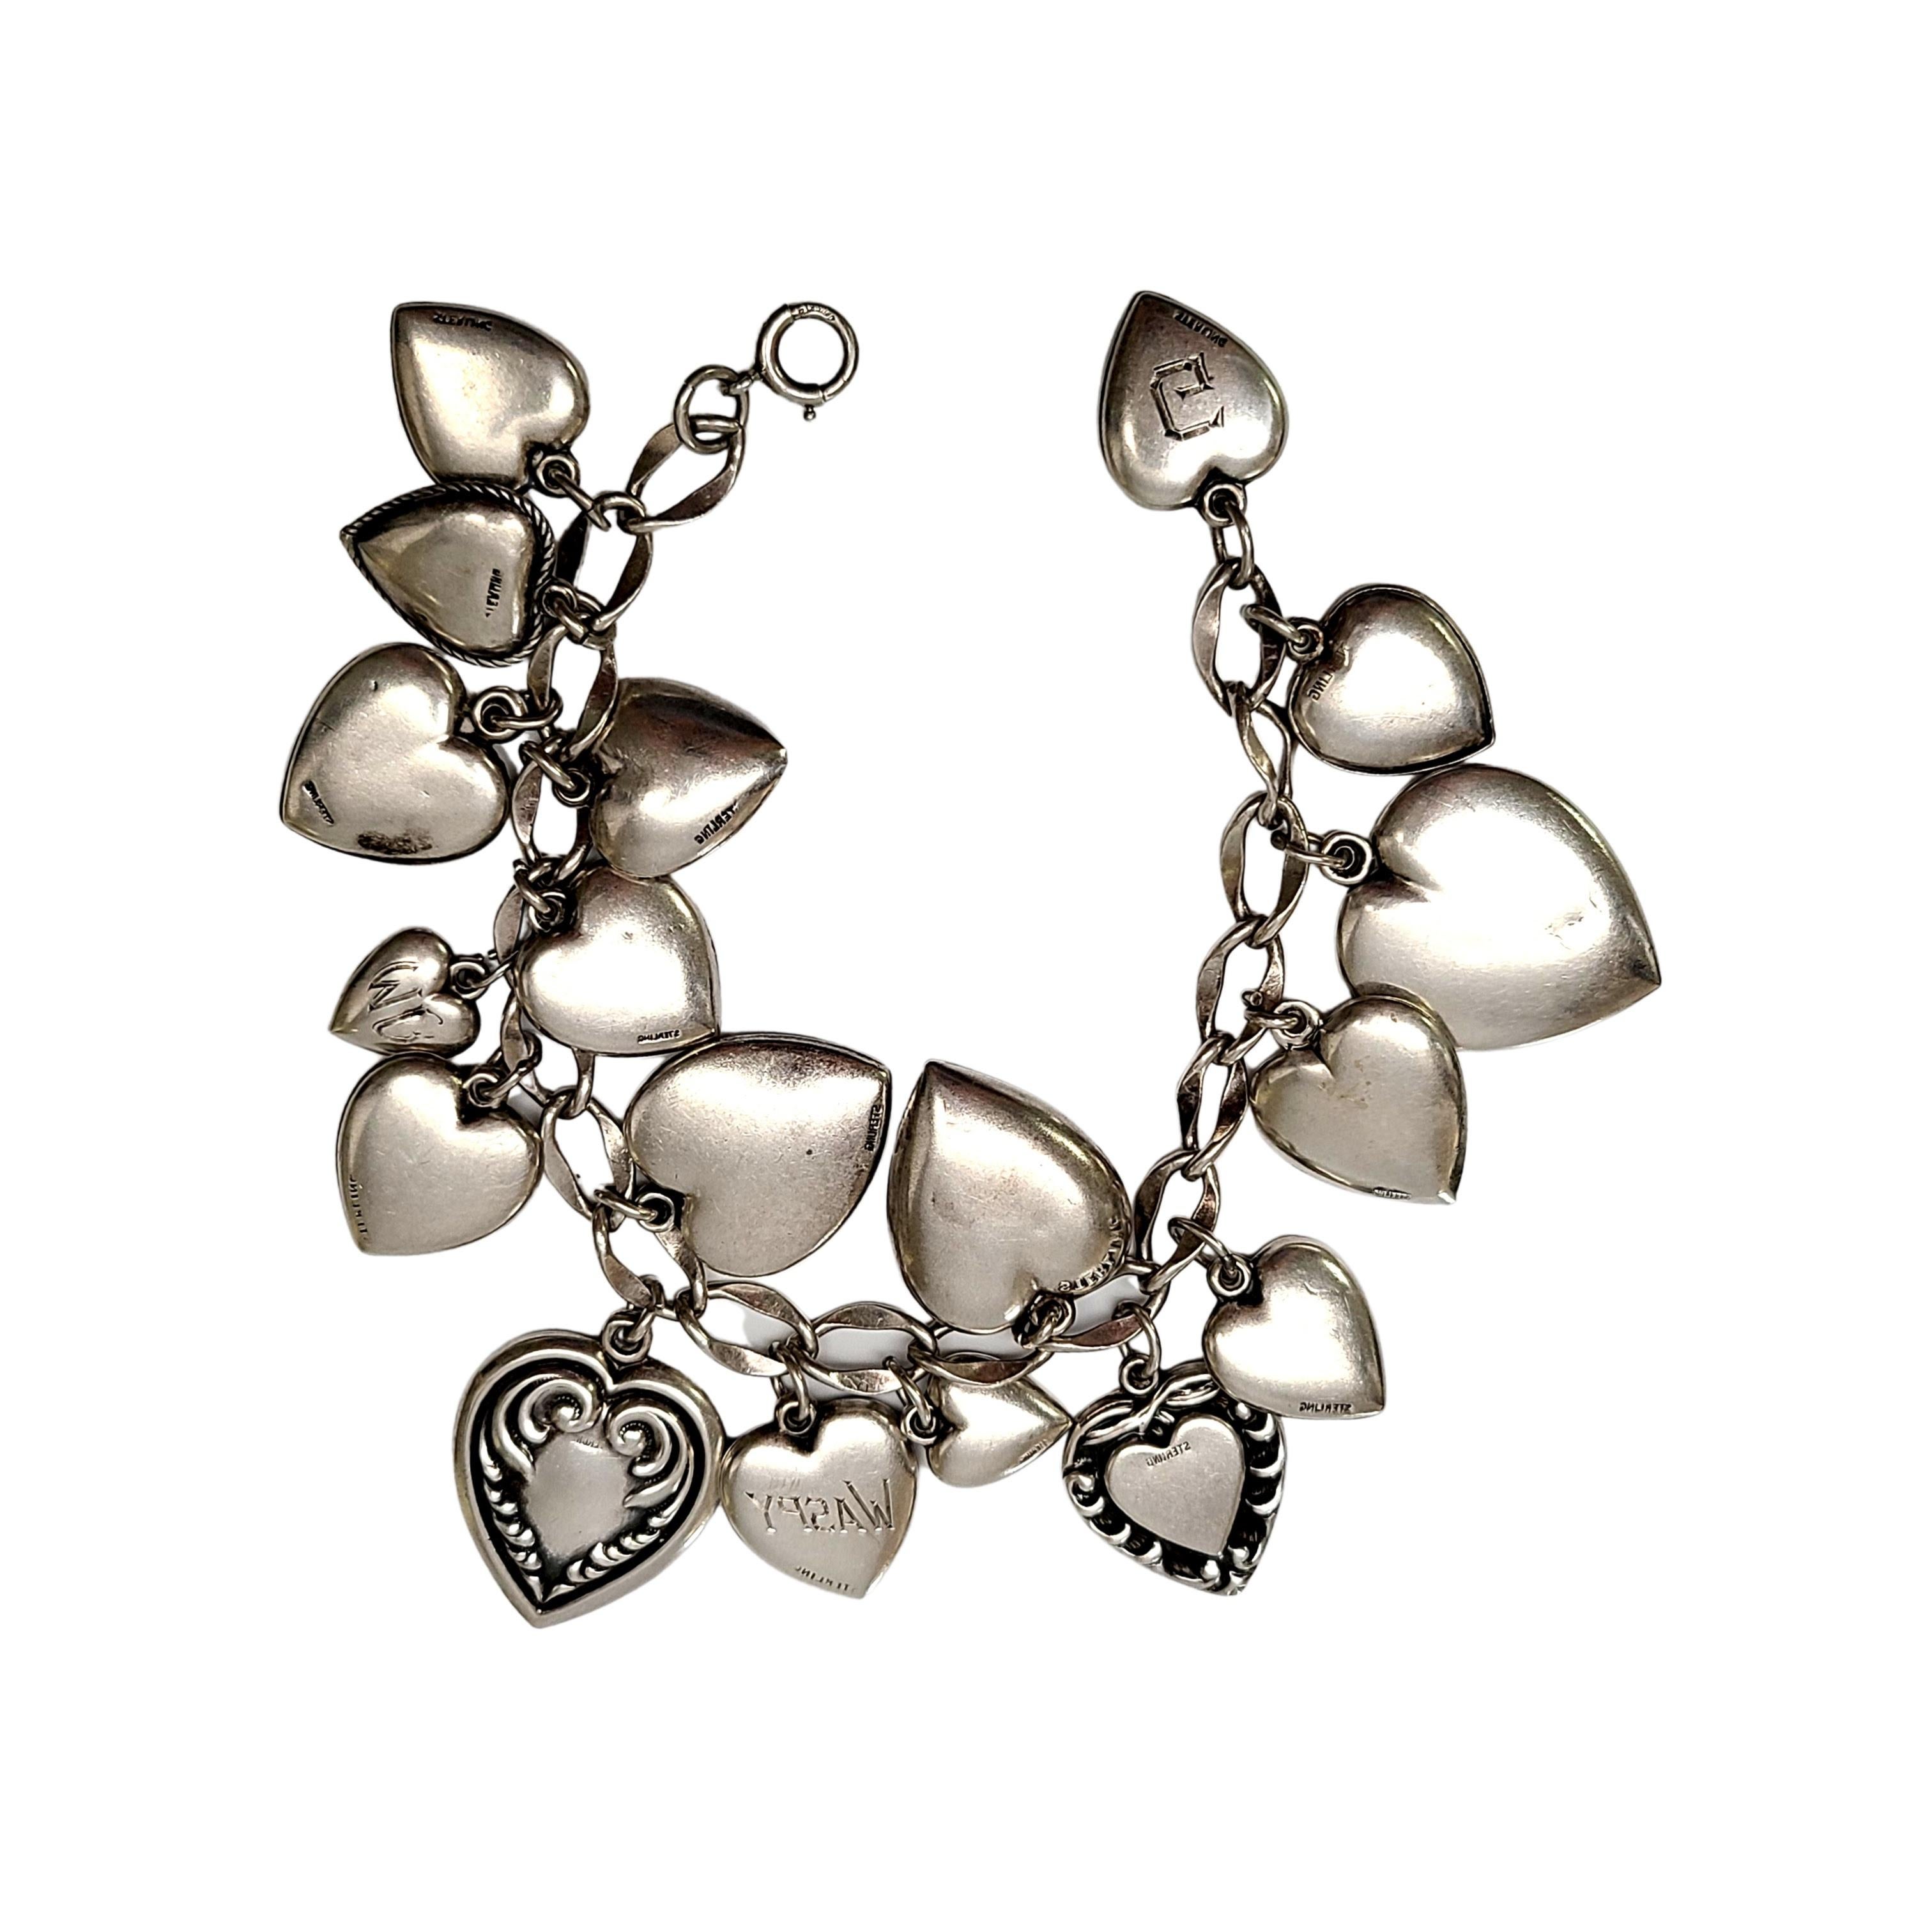 Sterling silver loaded puffy heart charm bracelet.

18 different heart charms adorn this loaded charm bracelet. Each heart have different designs, including 2 blue enameled hearts.

Measures 6 3/6